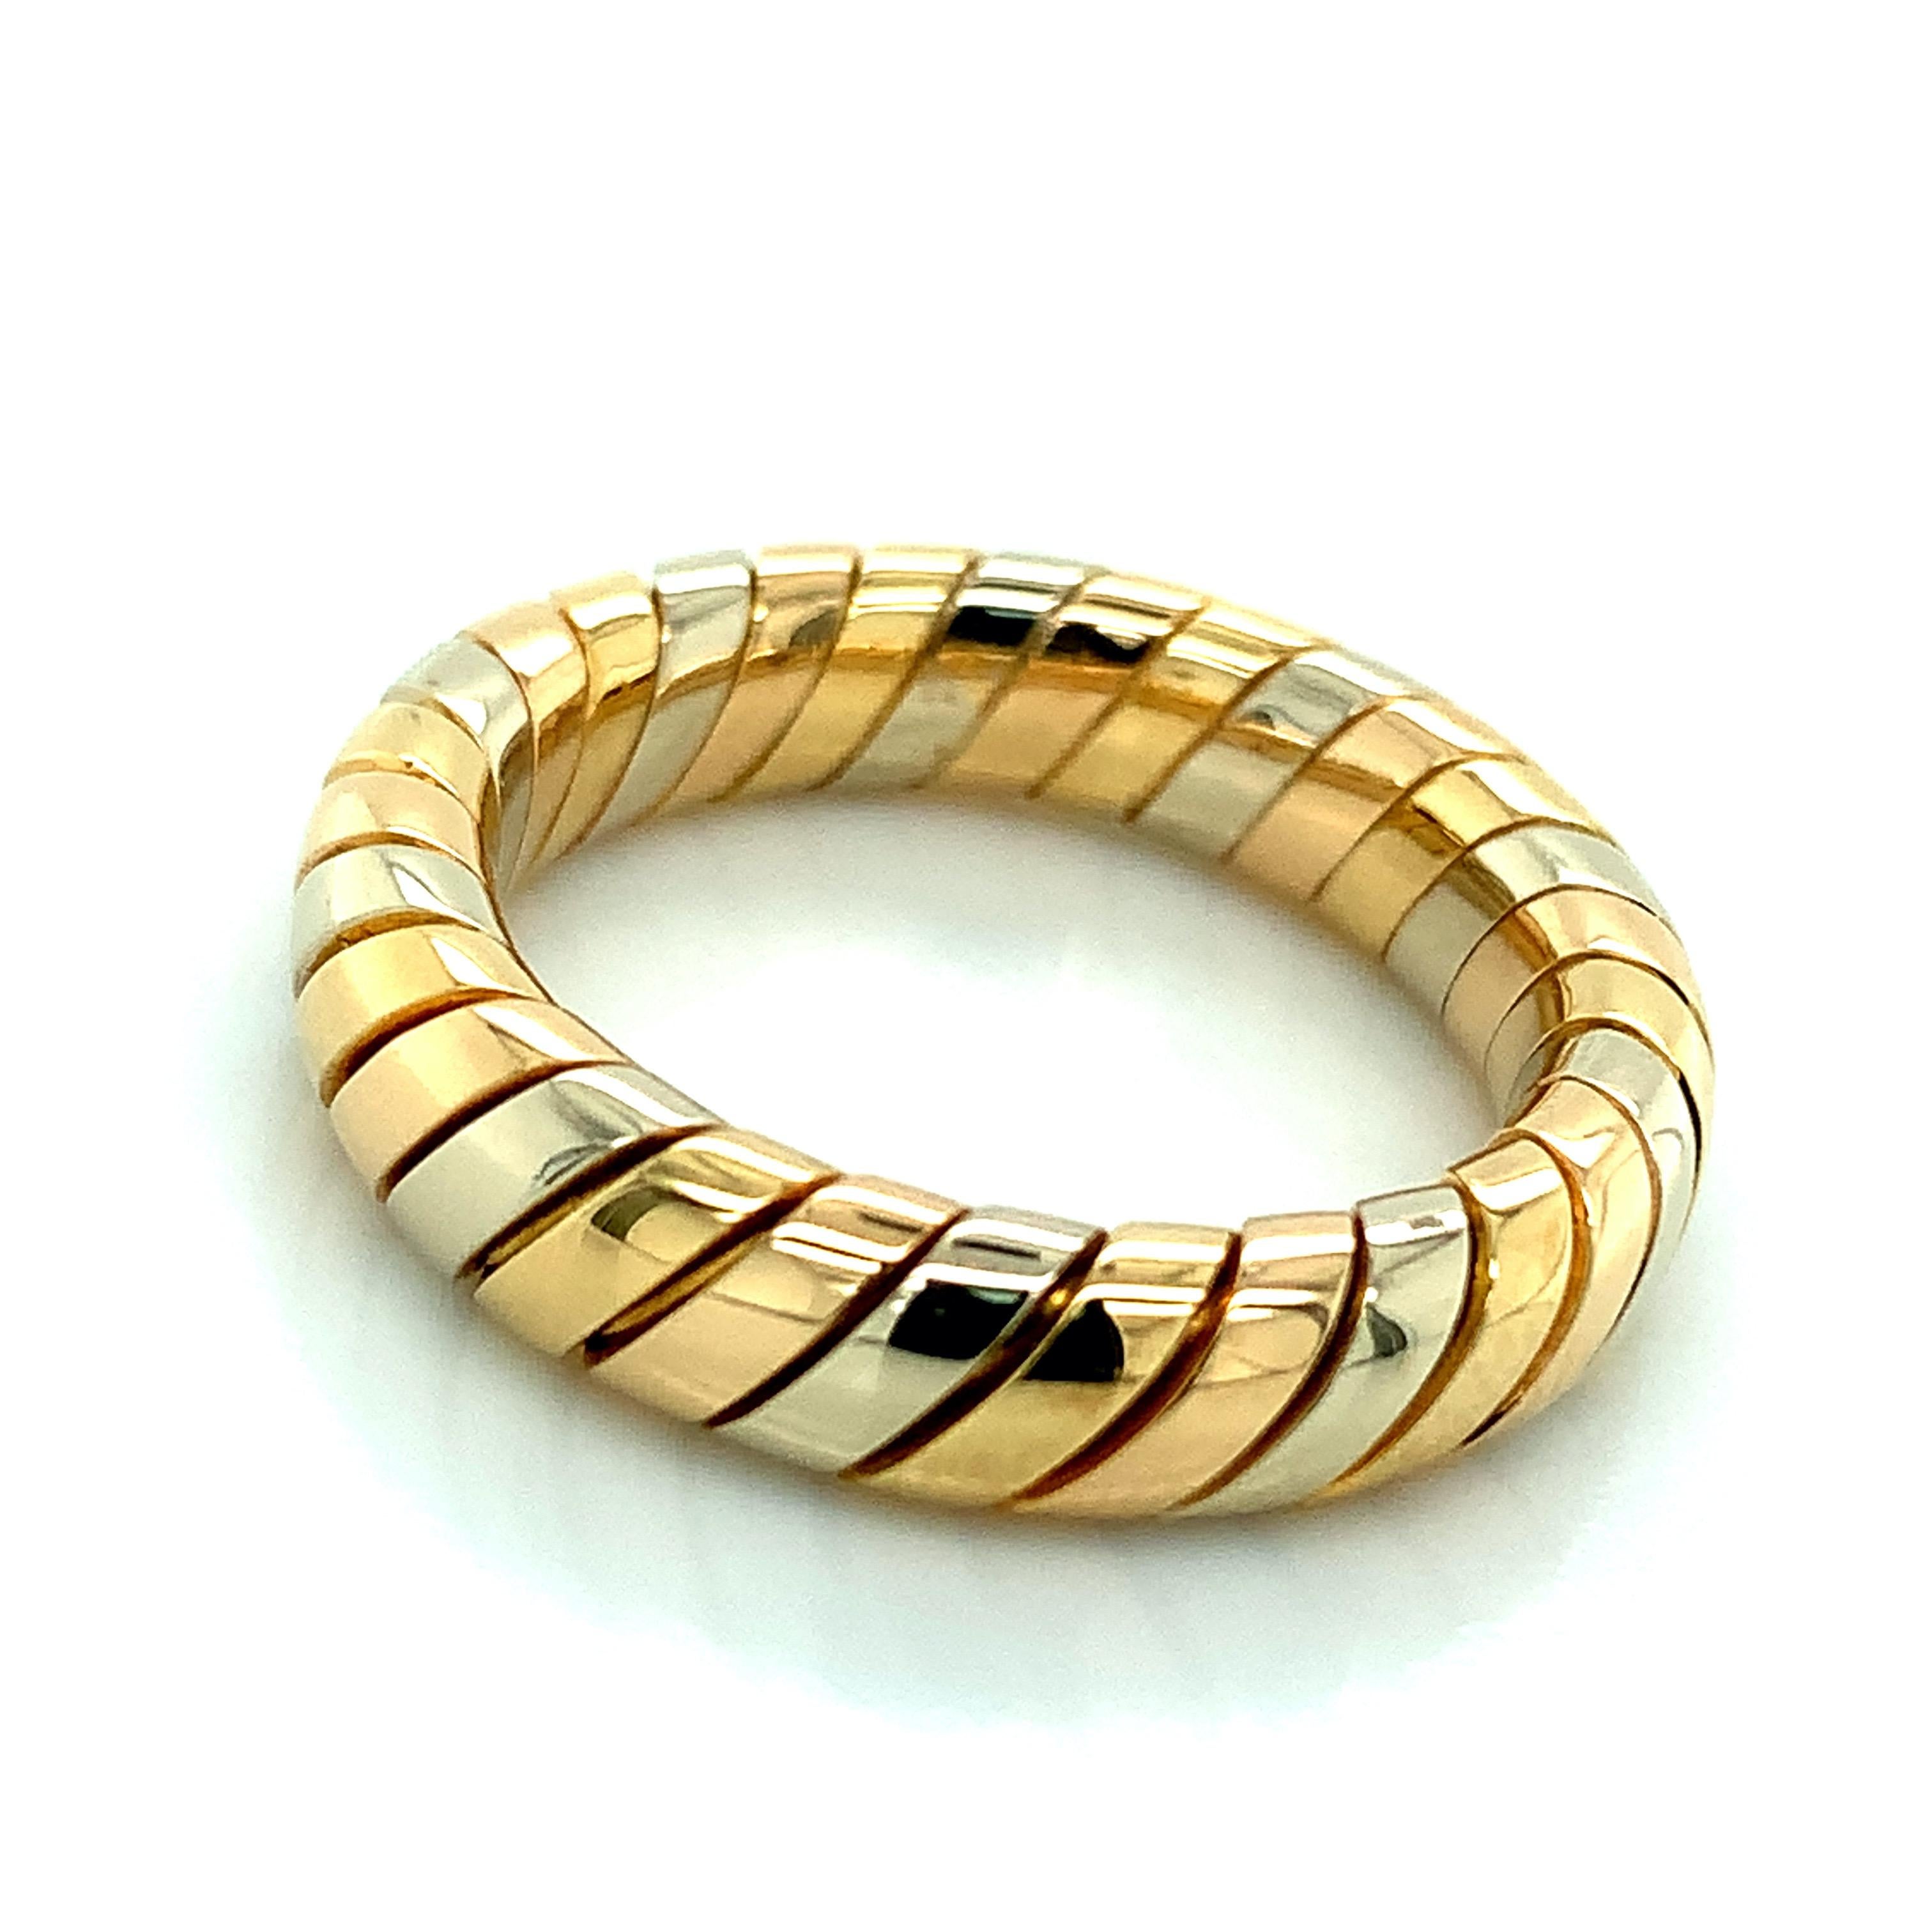 Bvlgari 18 karat yellow, white, and rose gold ring from the iconic Tubogas collection. Marked: Bvlgari / Made in Italy. It weighs 7.2 grams. Size 5.75-6.